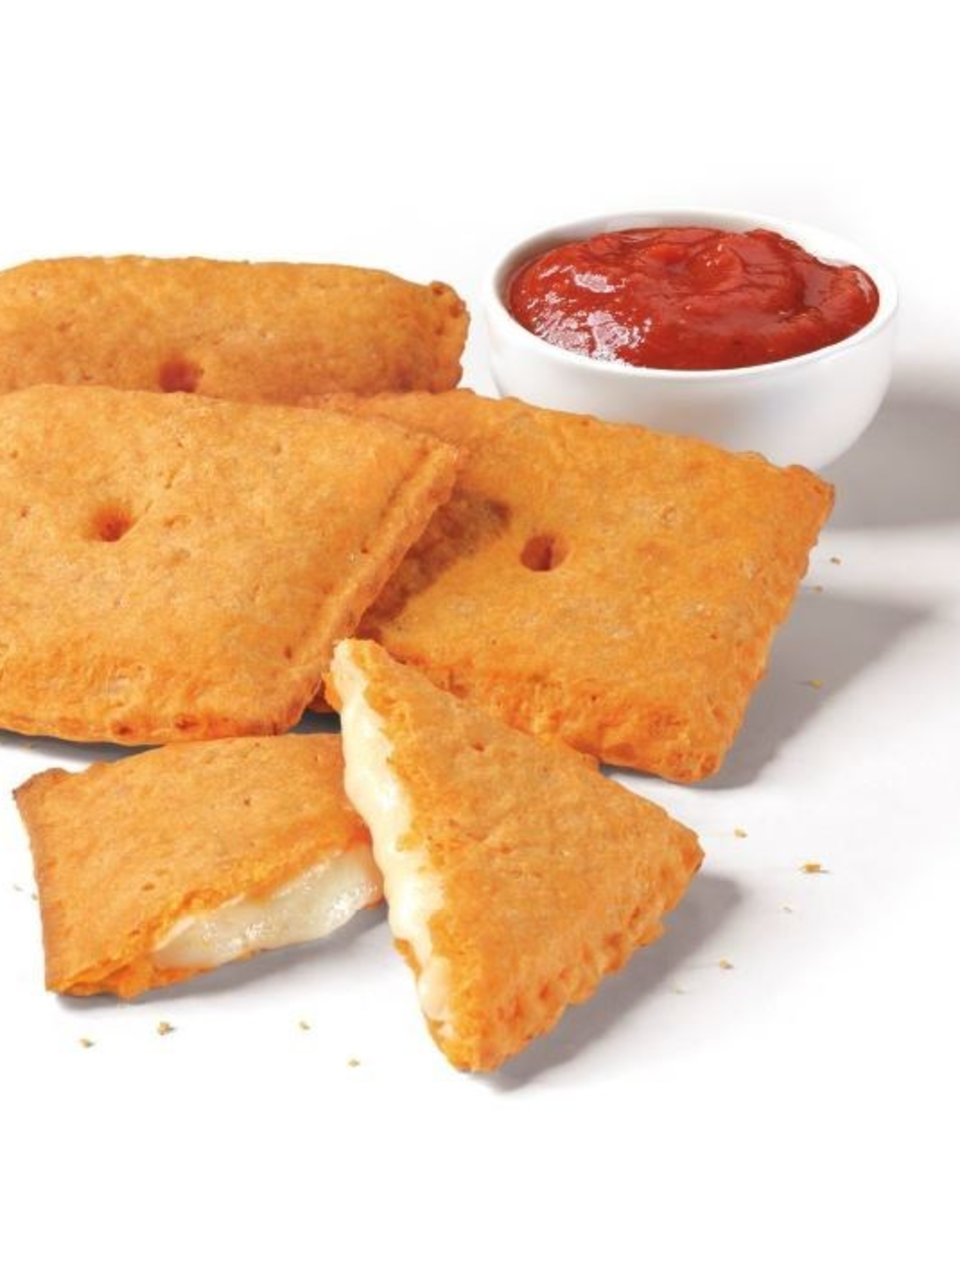 Pizza Hut And Cheez It Join Forces To Bring You The One Of A Kind